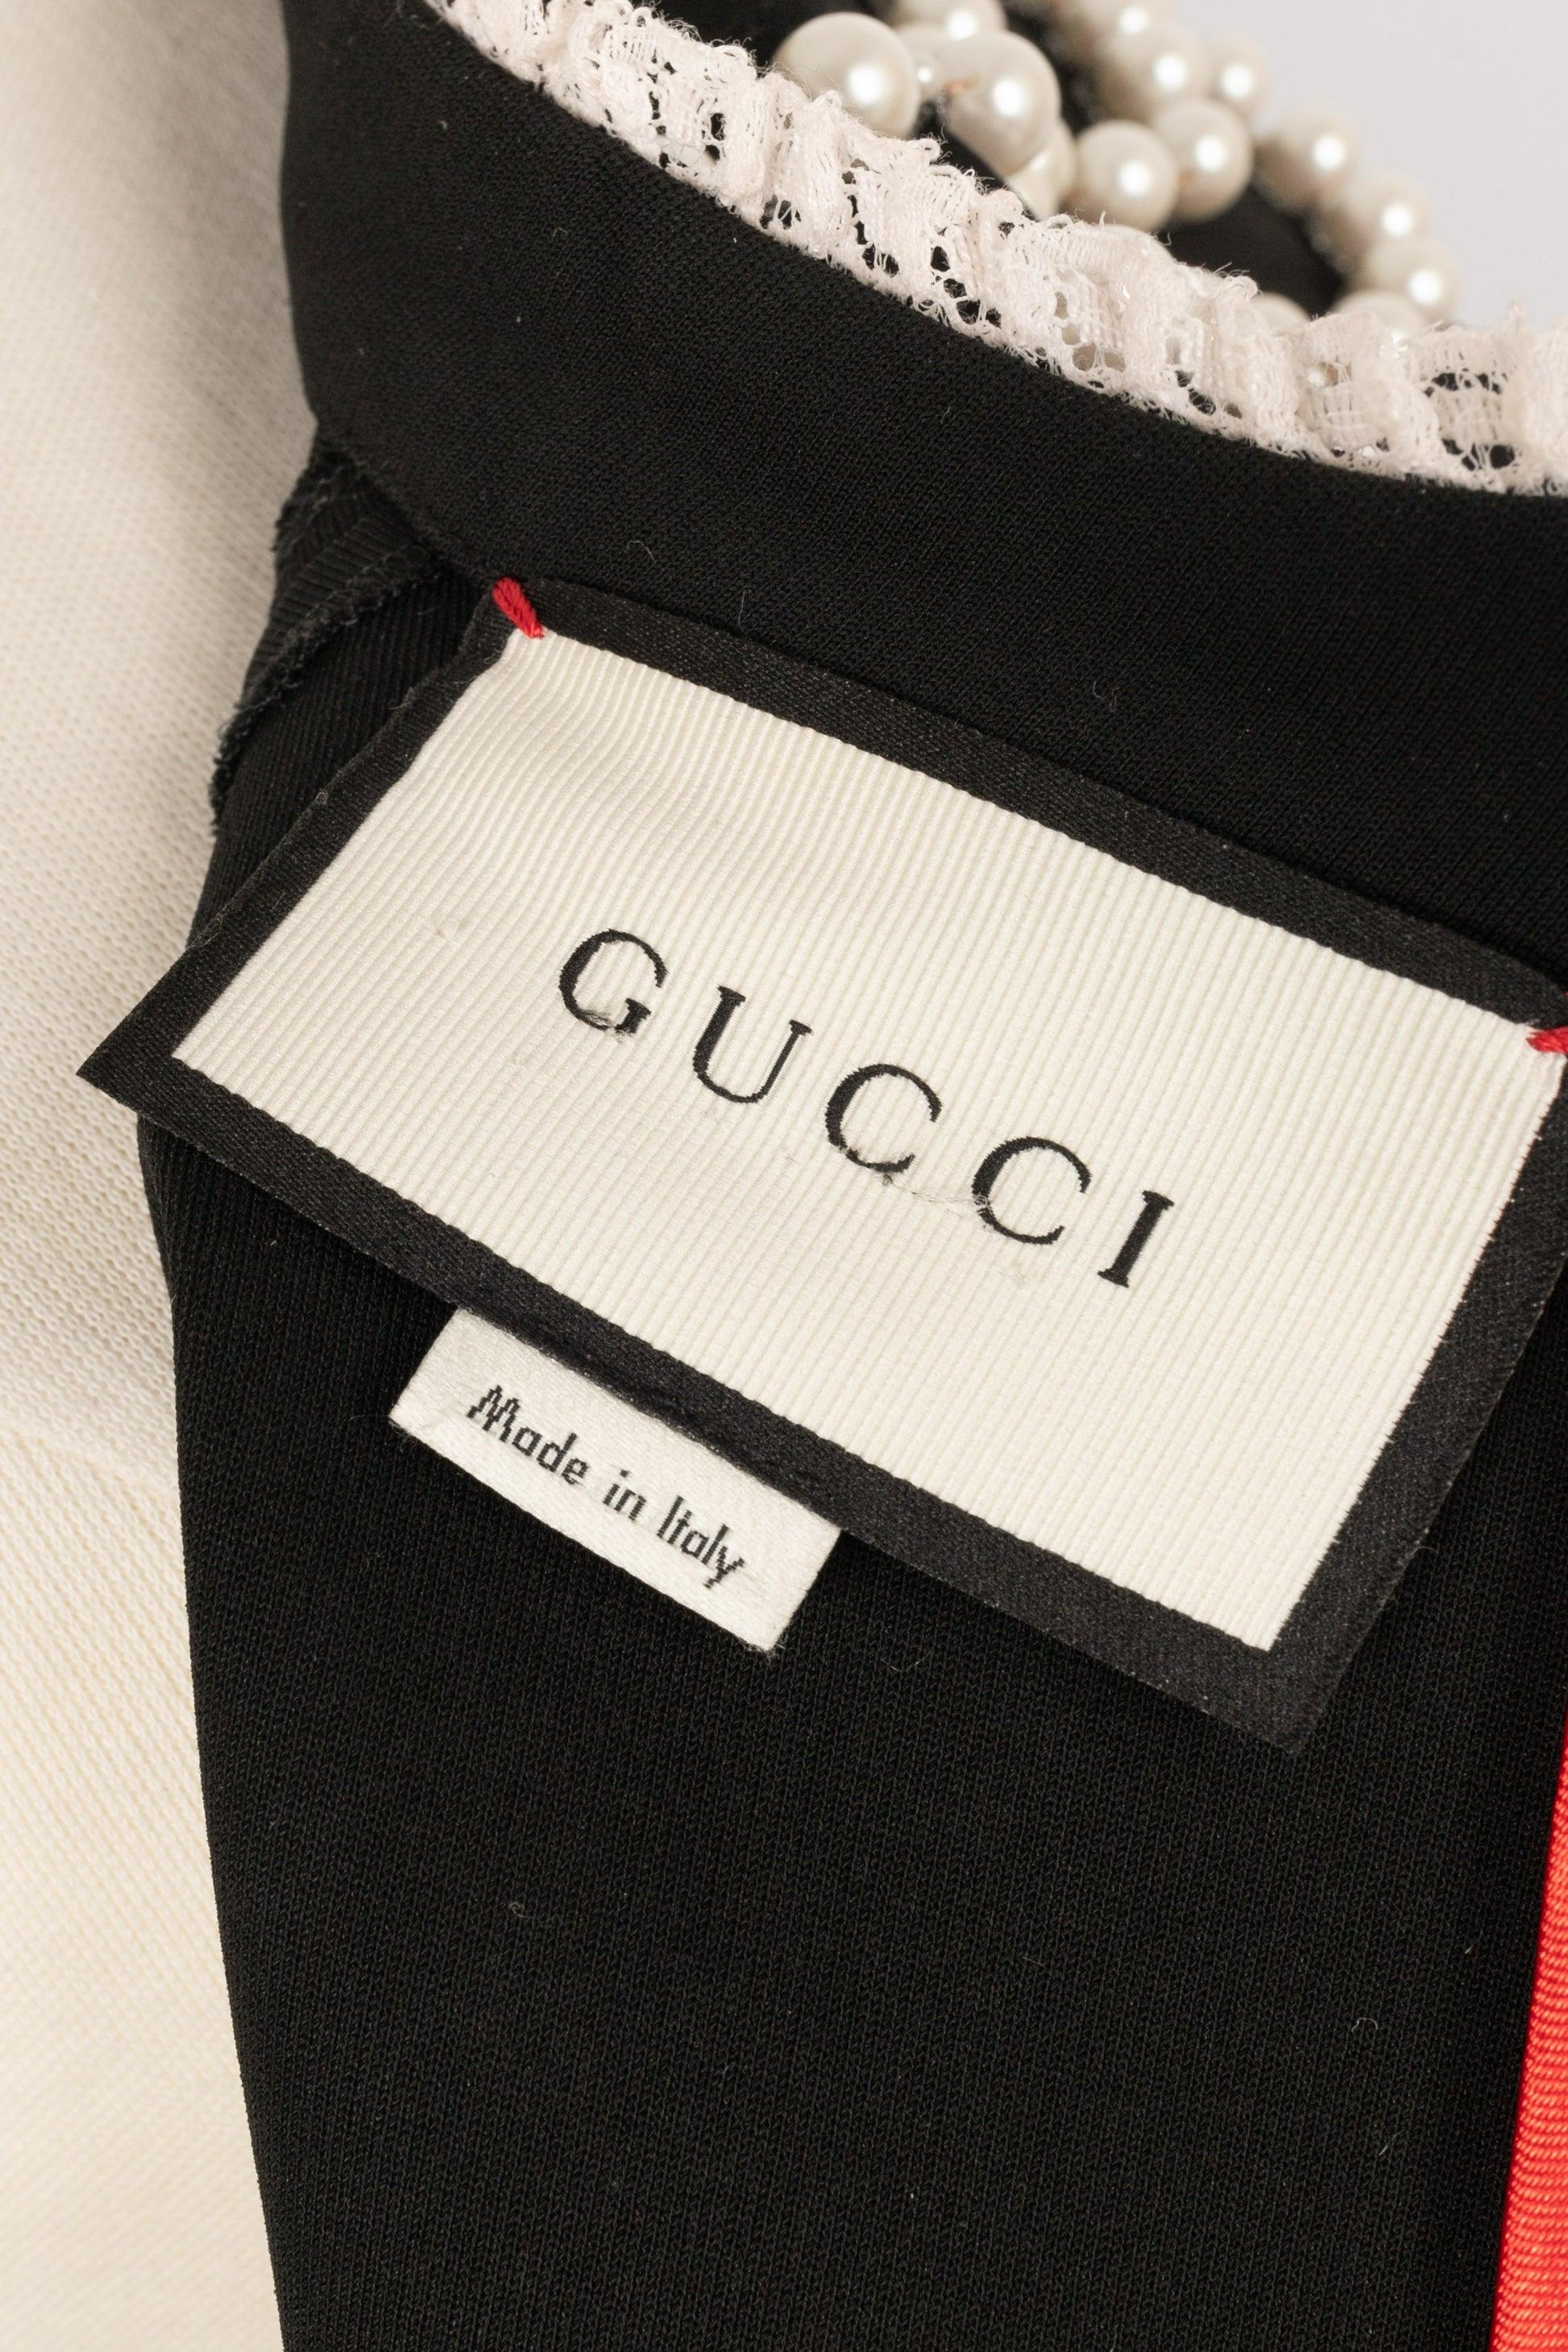 Gucci Blended Cotton Dress Sewn with Jewelry For Sale 2